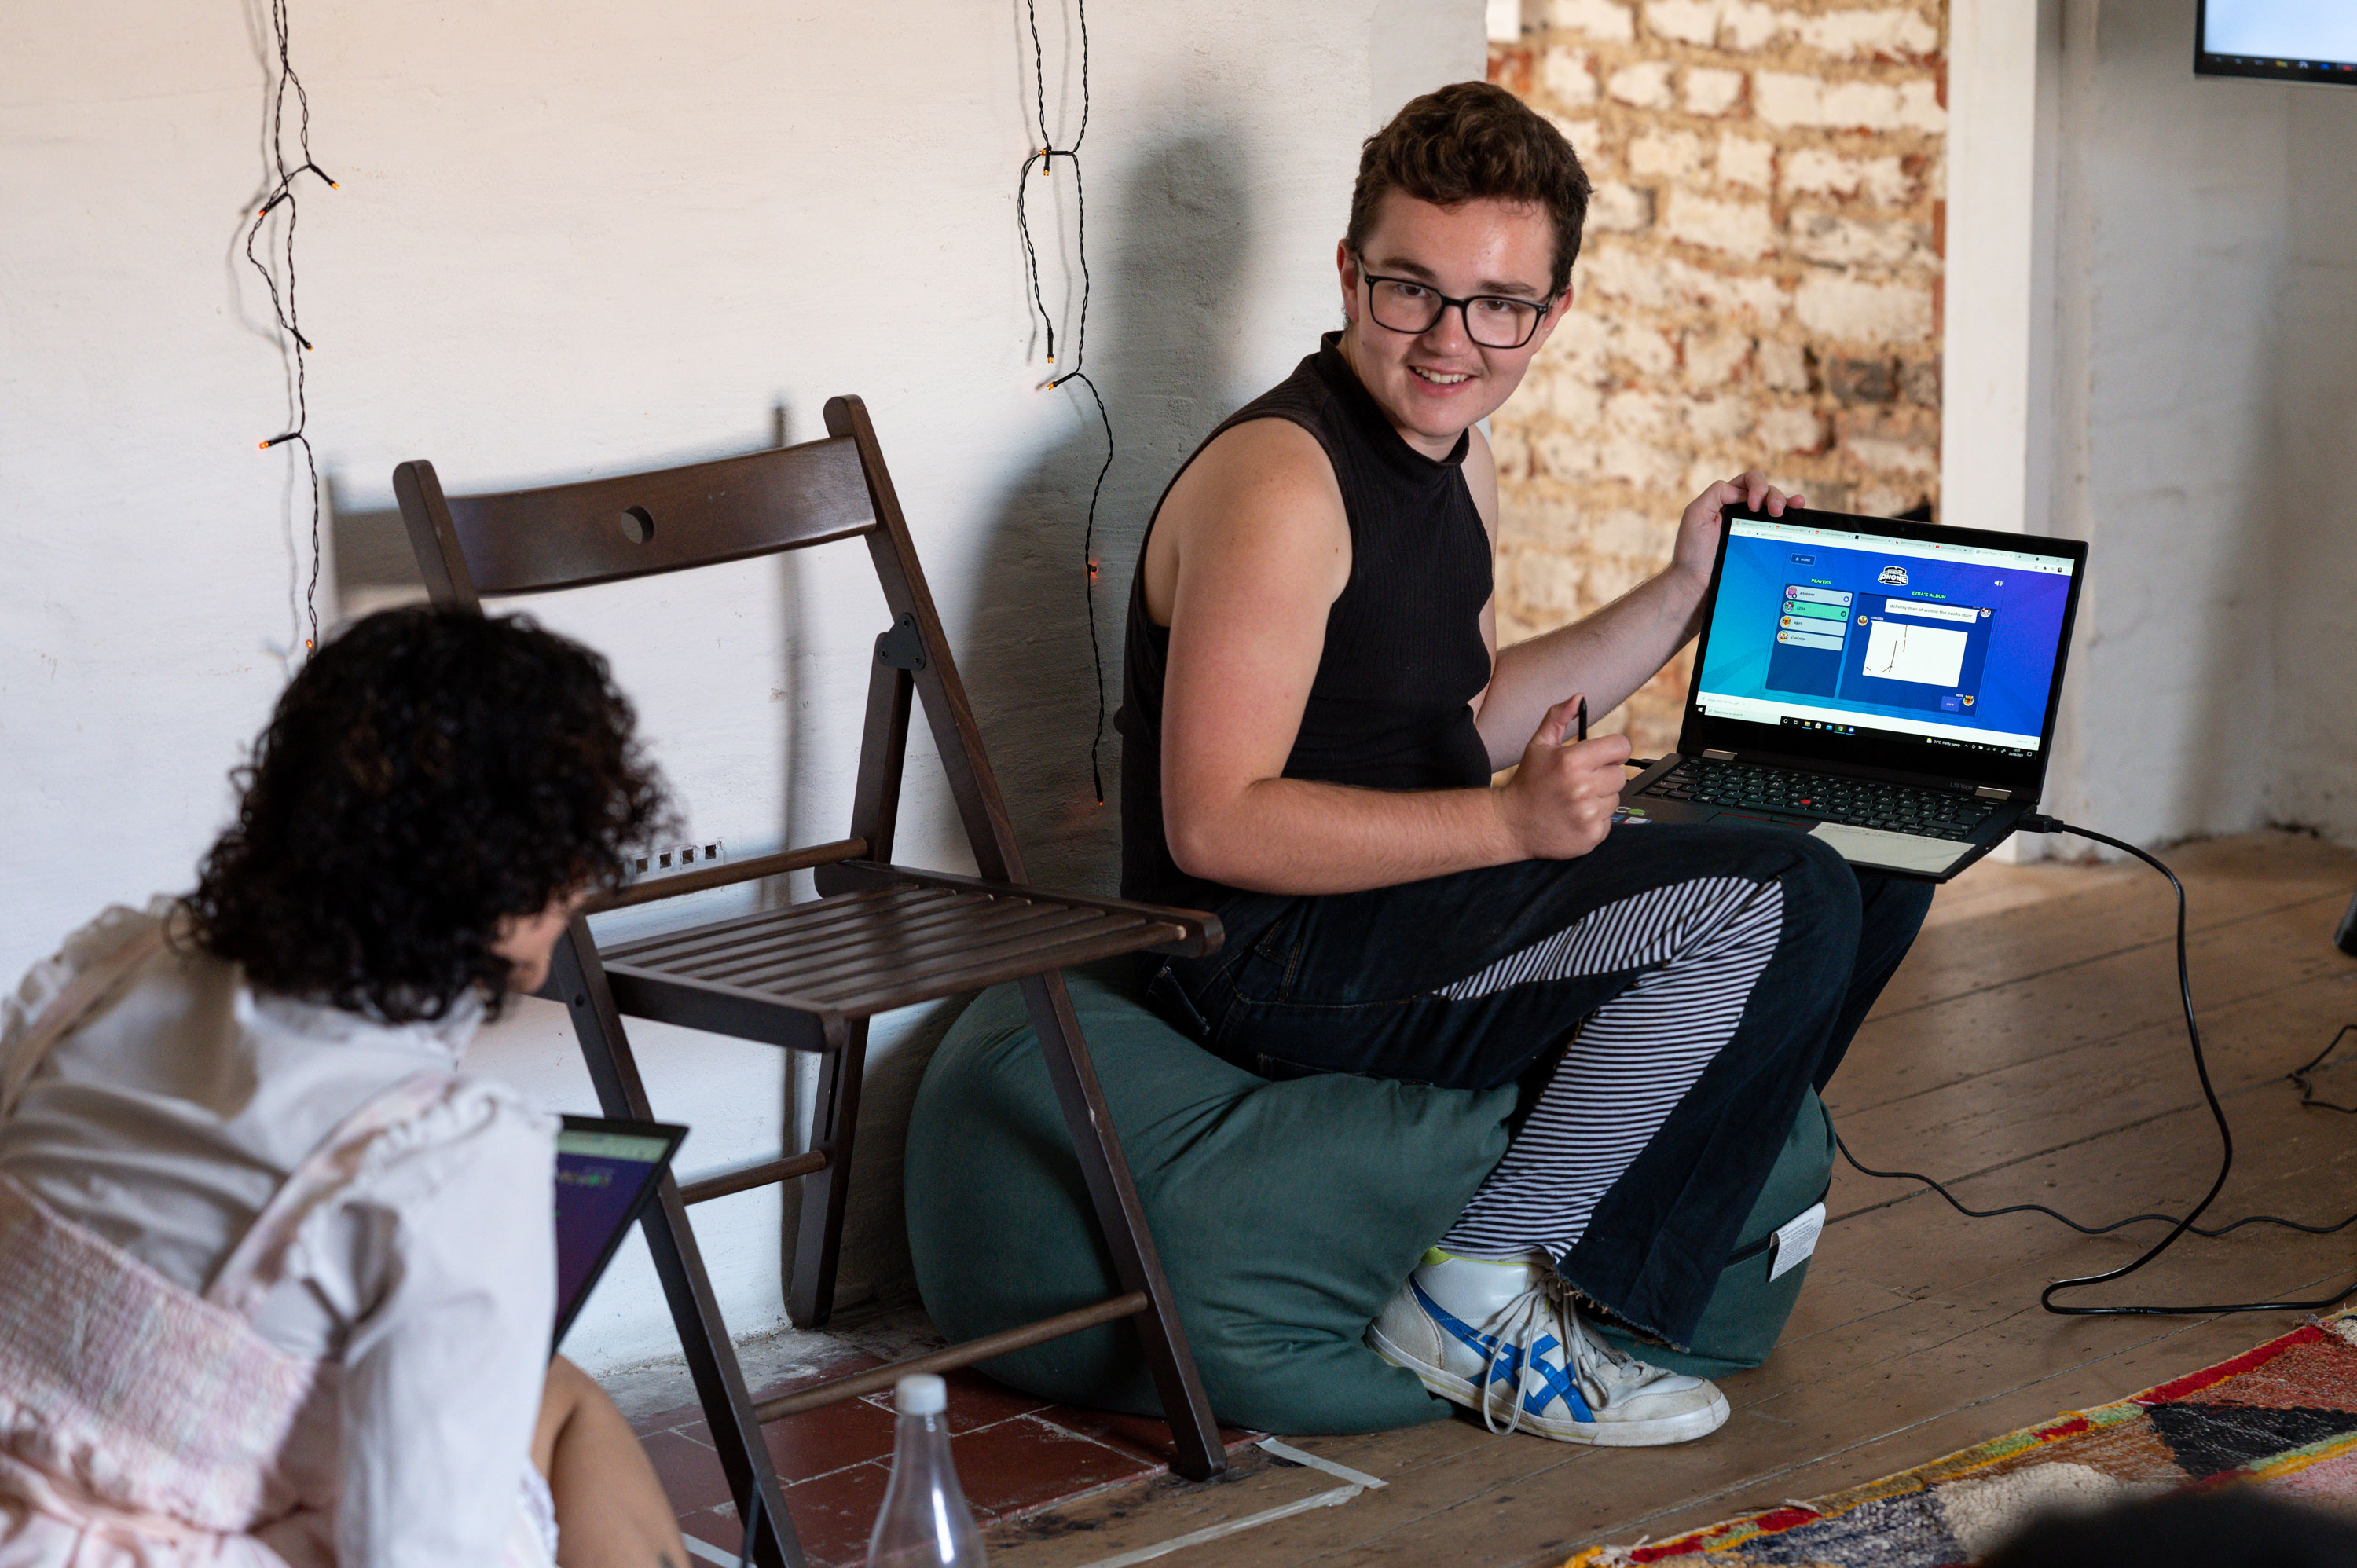 A white person, short haired person using a laptop to present to a young person